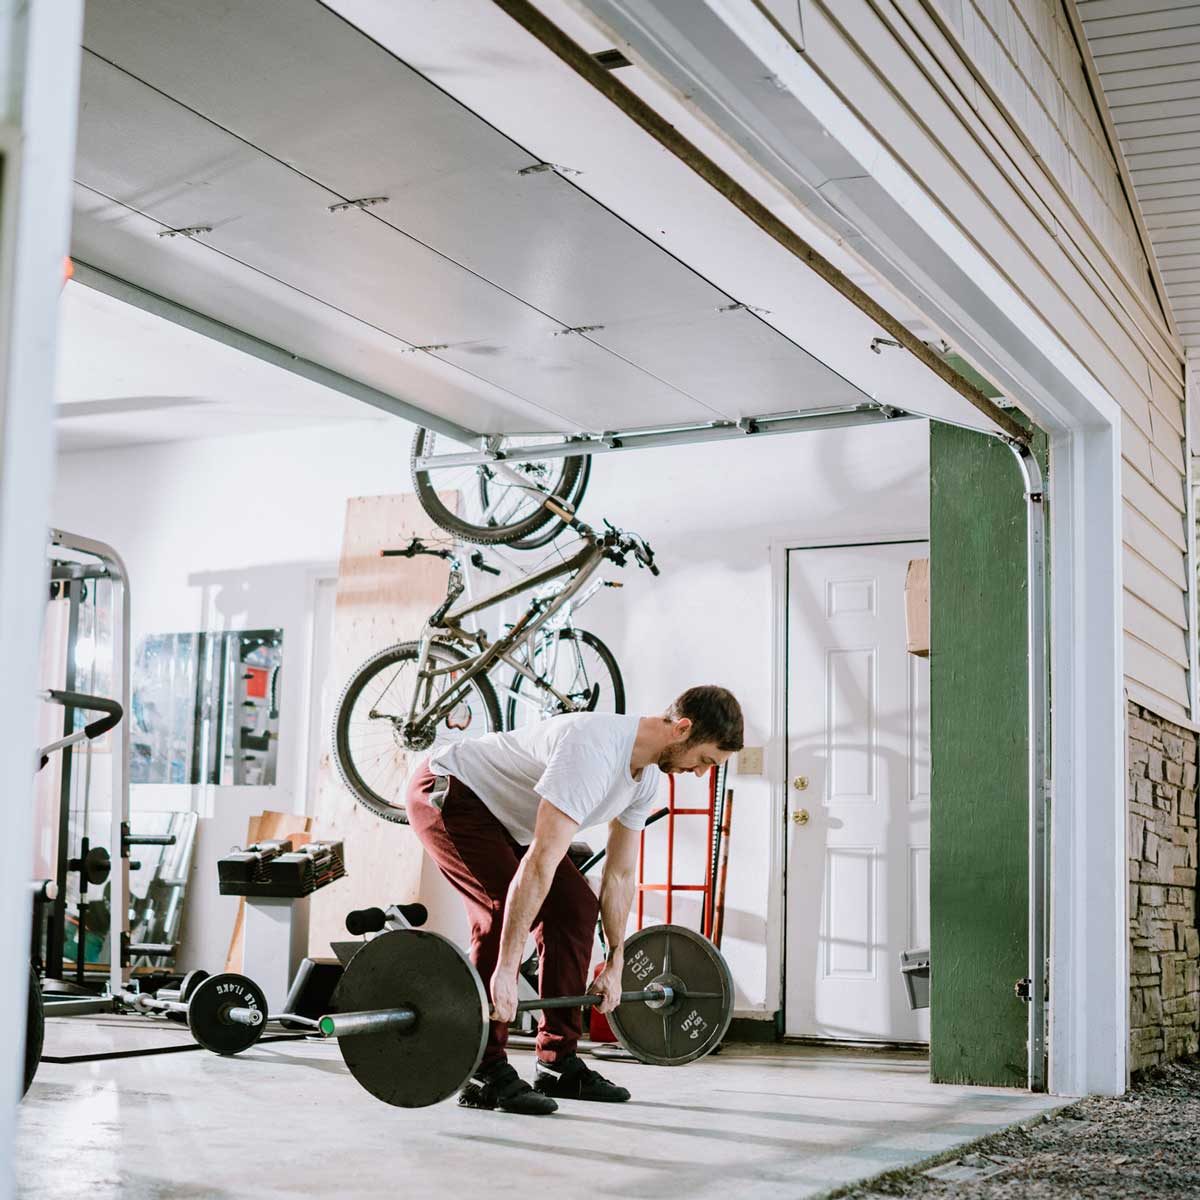 14 Home Gym Ideas To Make You Sweat (In A Good Way)